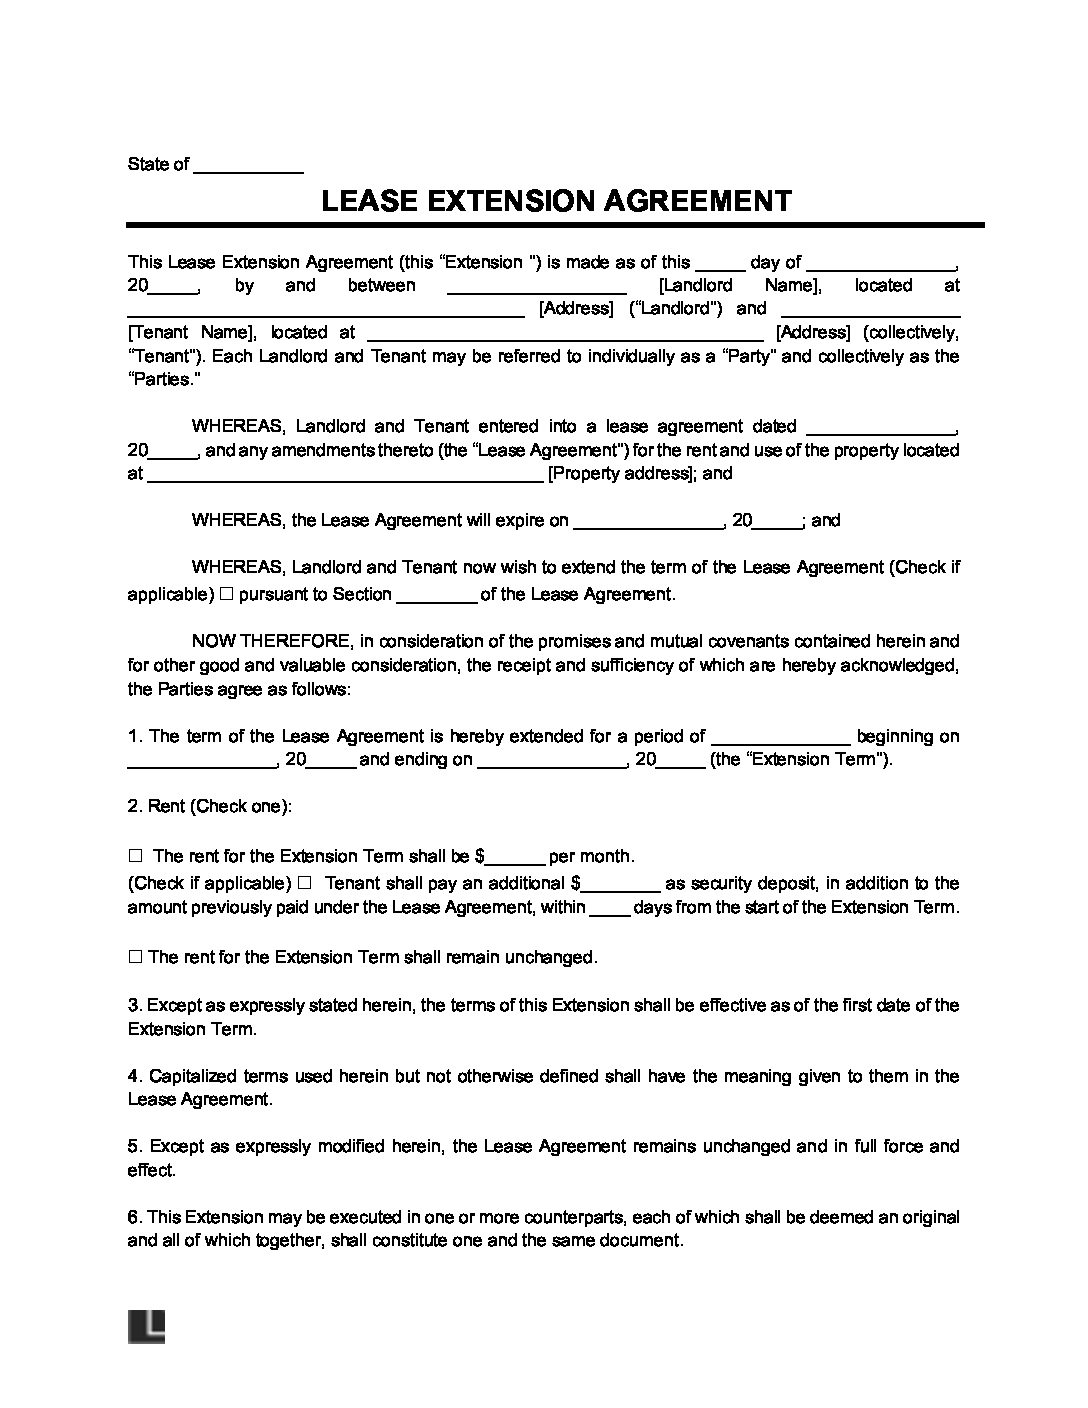 assignment of lease extension